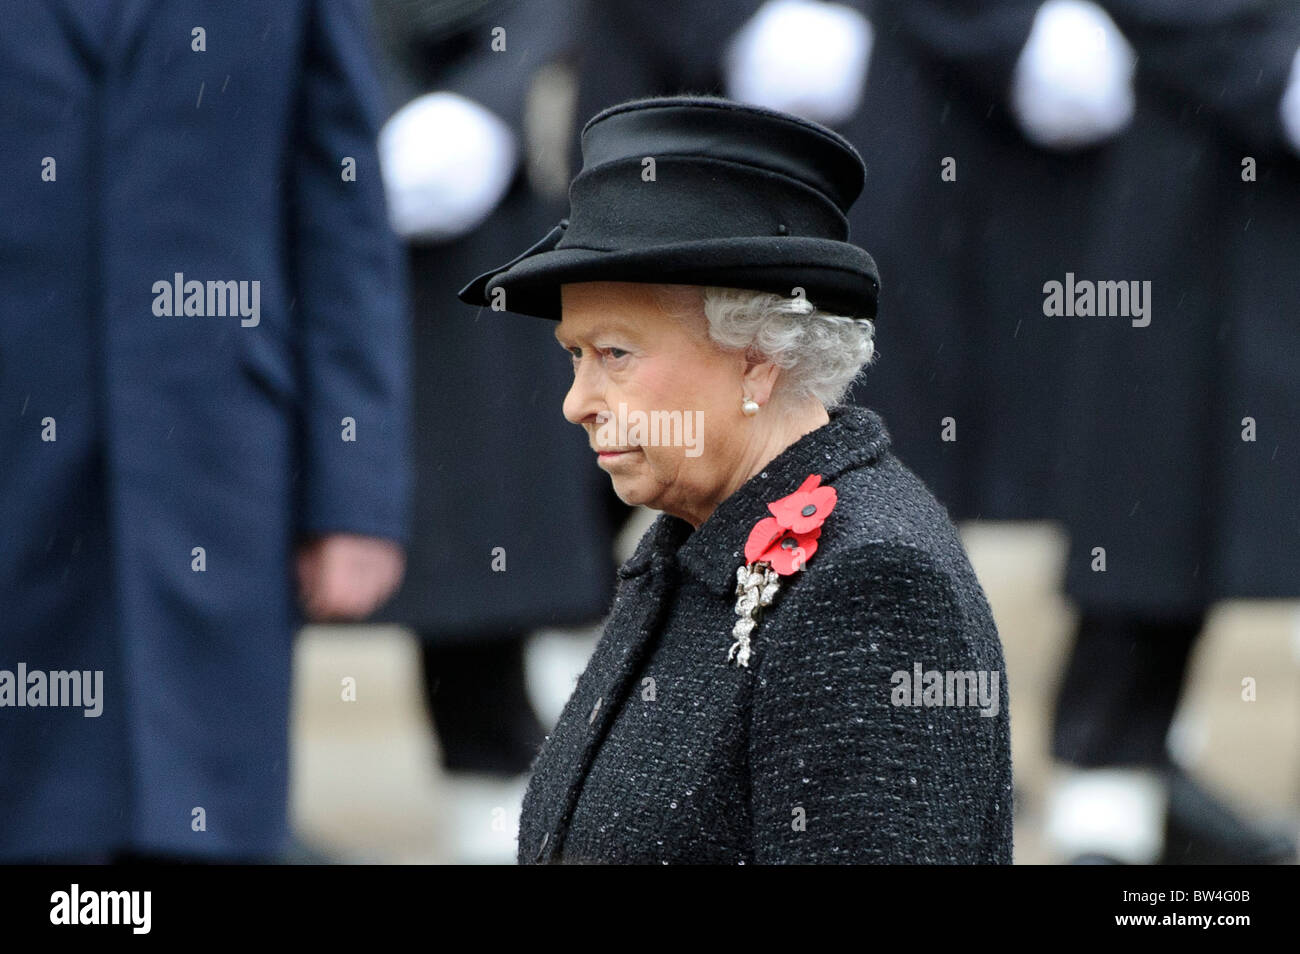 HM Queen Elizabeth II attends the Remembrance Sunday Memorial Service at the Cenotaph, Whitehall, London, November 14th 2010. Stock Photo